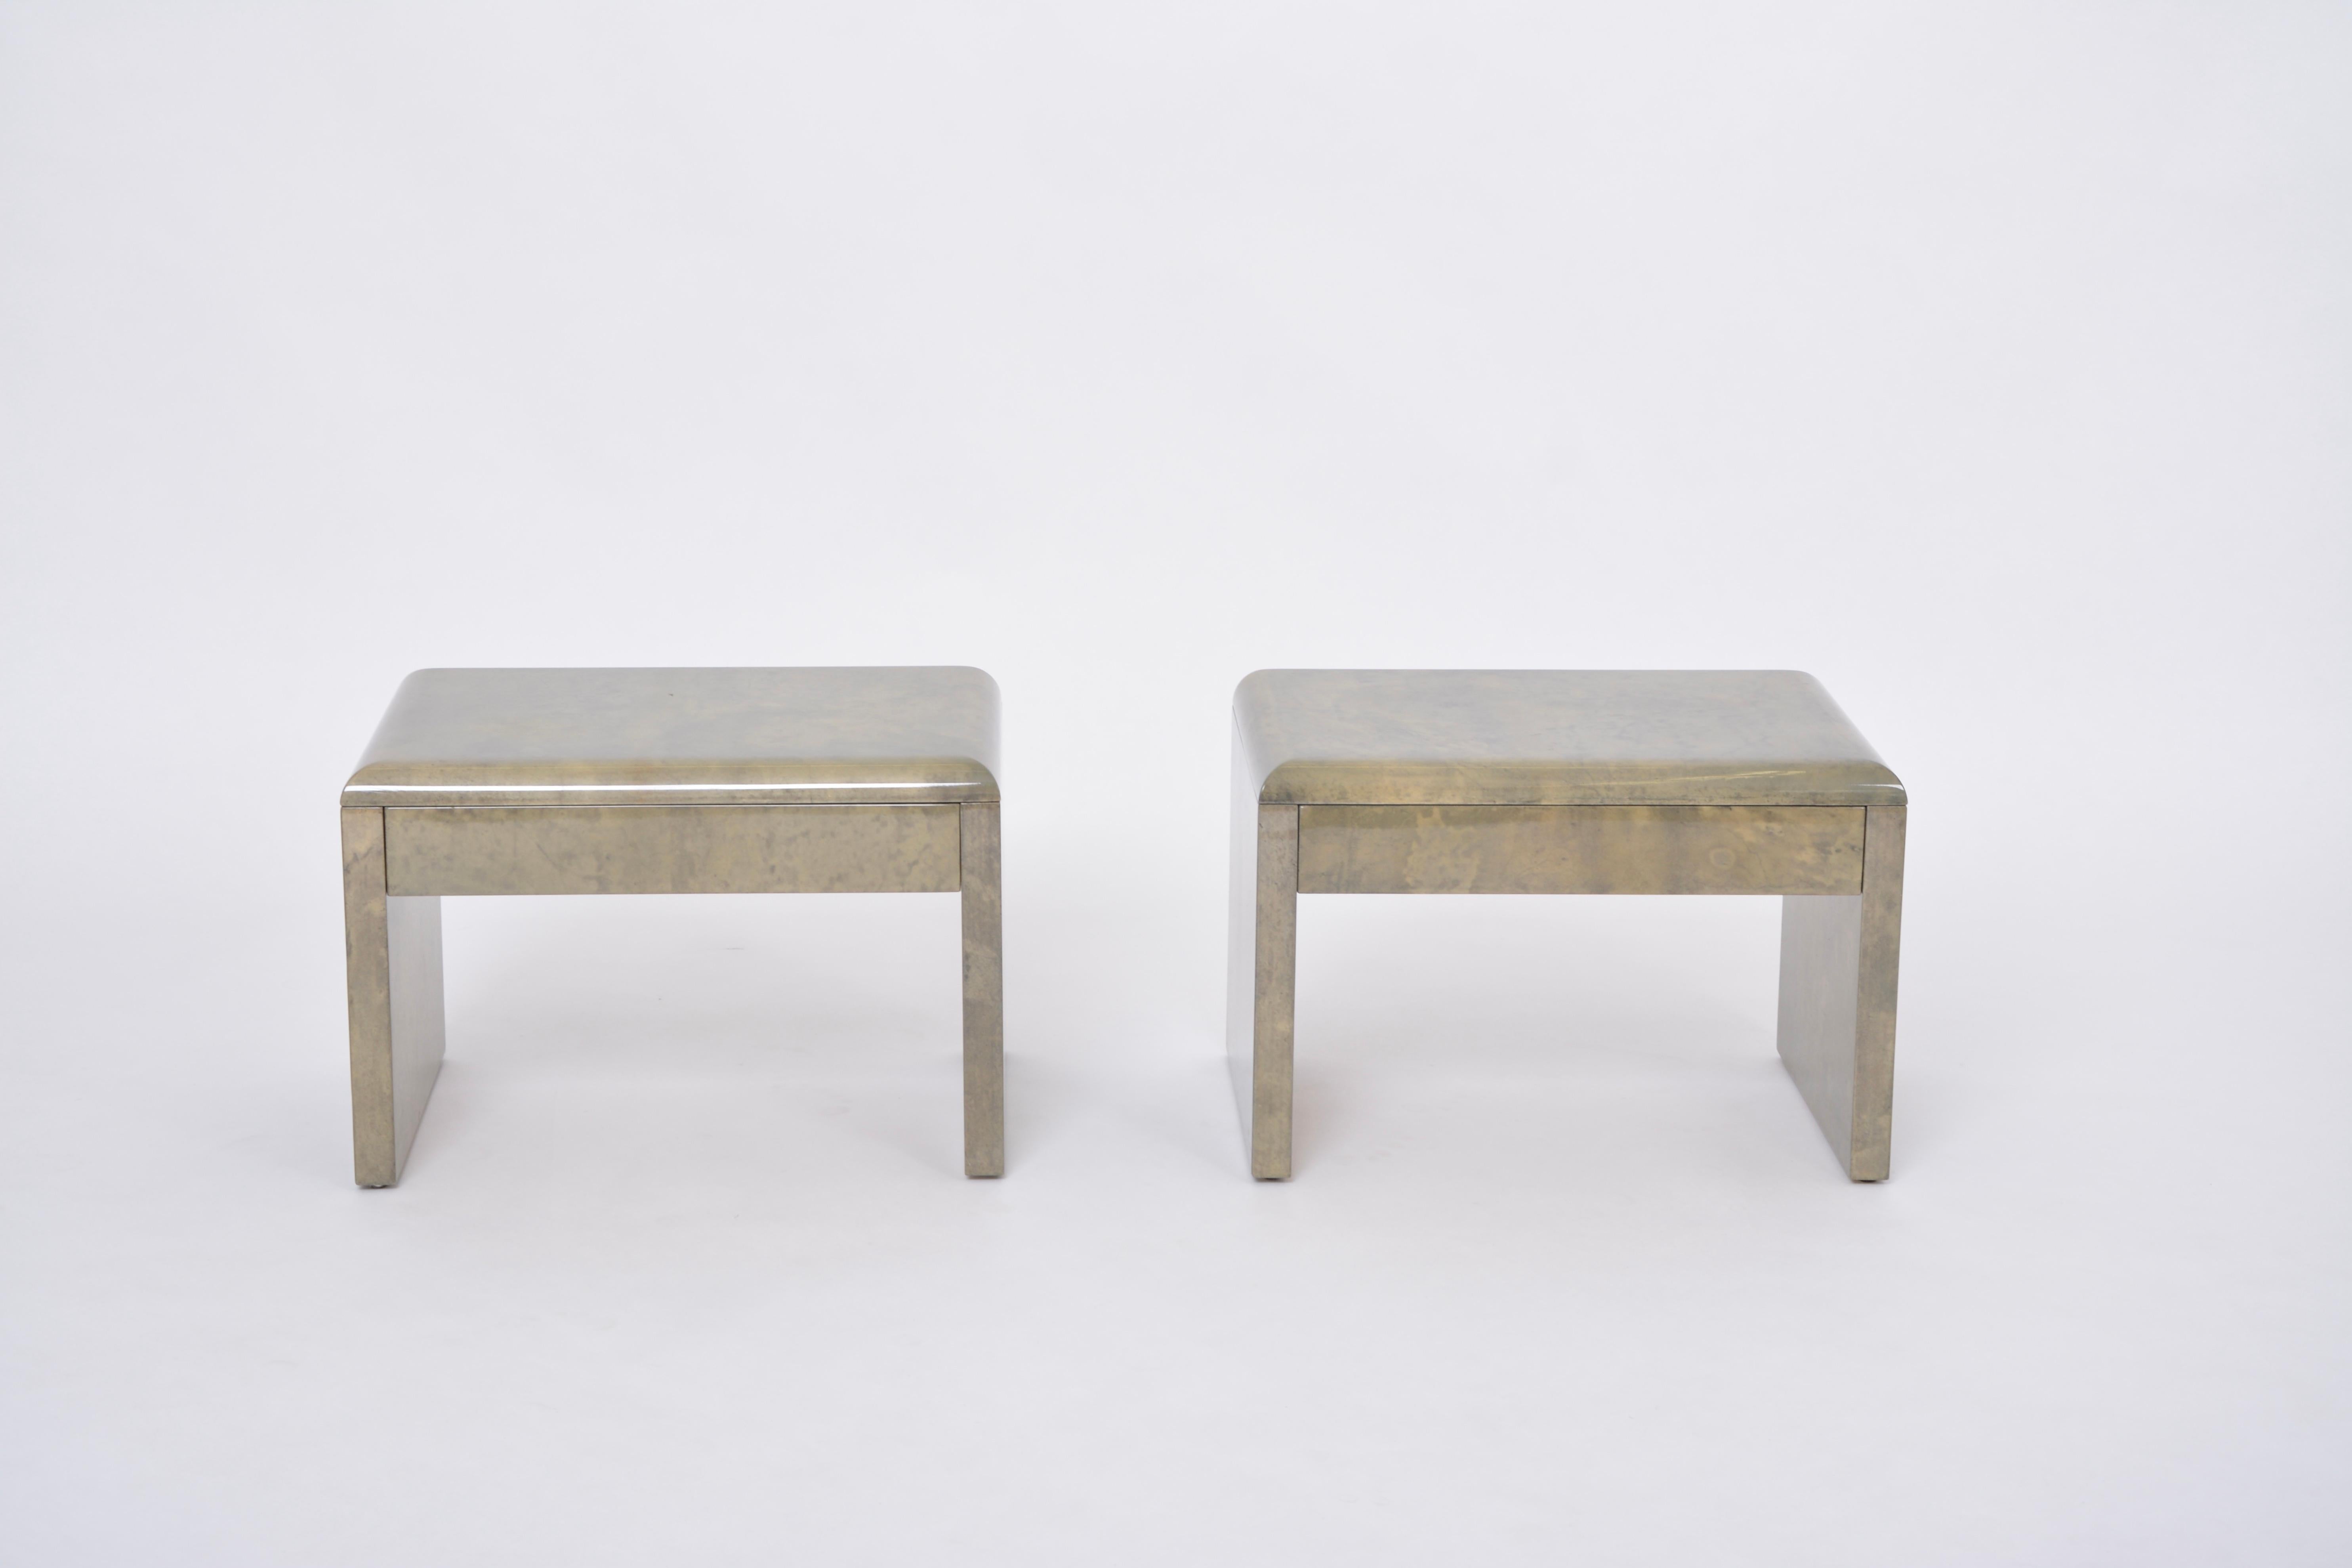 Pair of beside tables or night stands designed by Aldo Tura and produced in Italy approximately in the 1970s.
Each table has a wood structure which is covered in Aldo Tura's signature style parchment in tones of light and darker tones of green. The